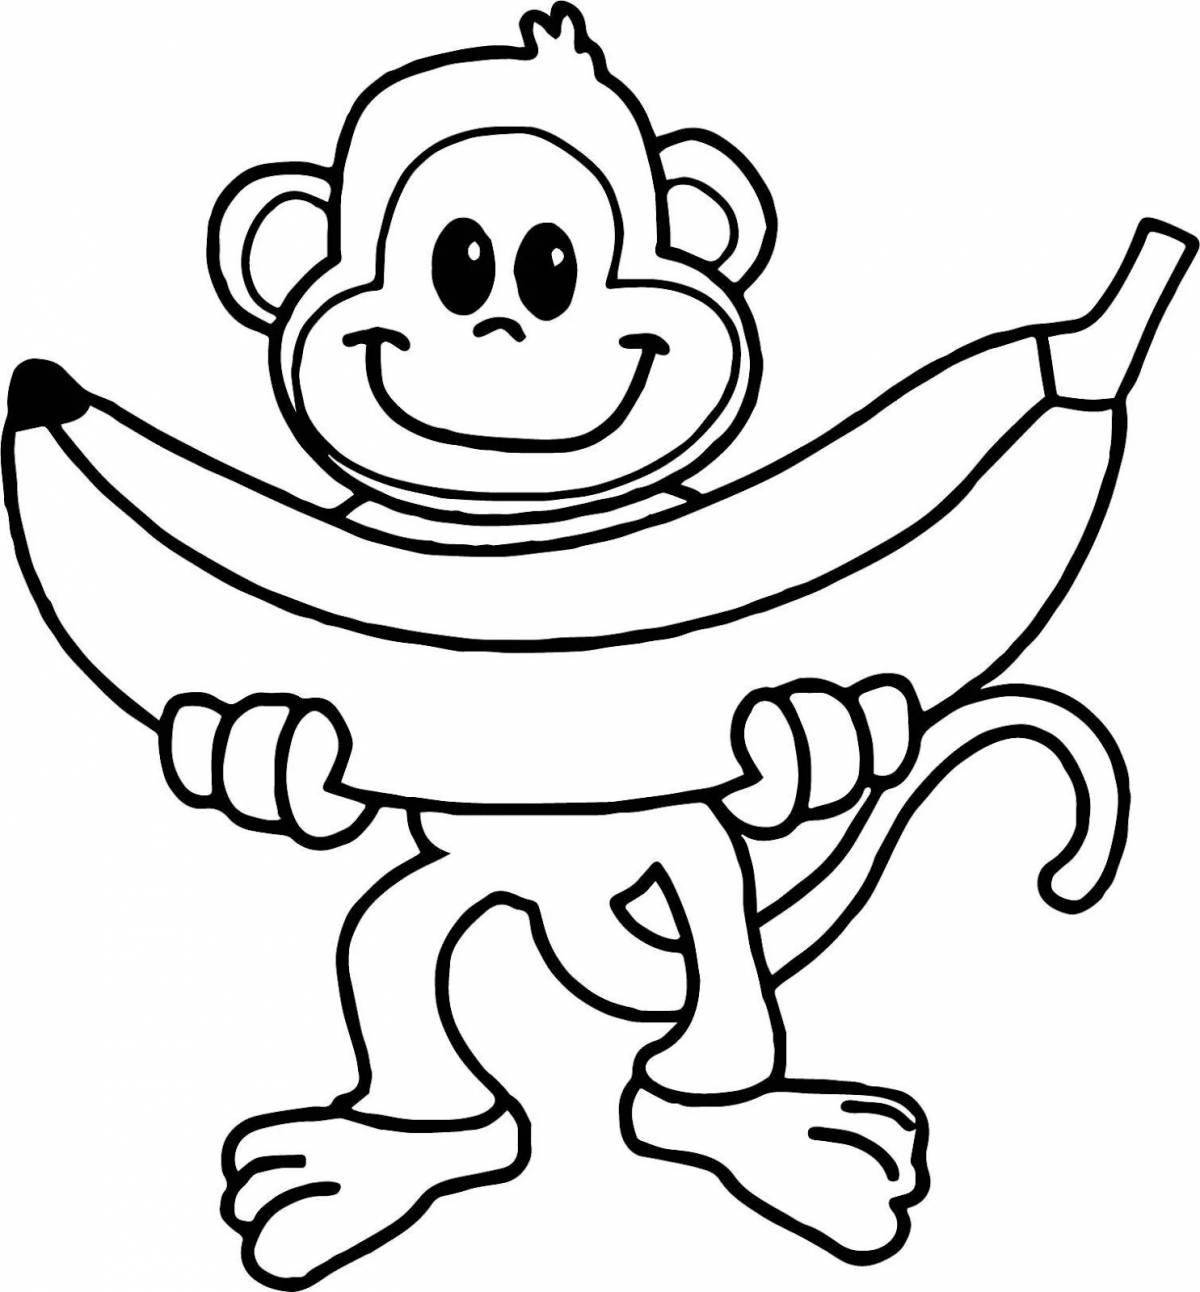 Glorious monkey coloring book